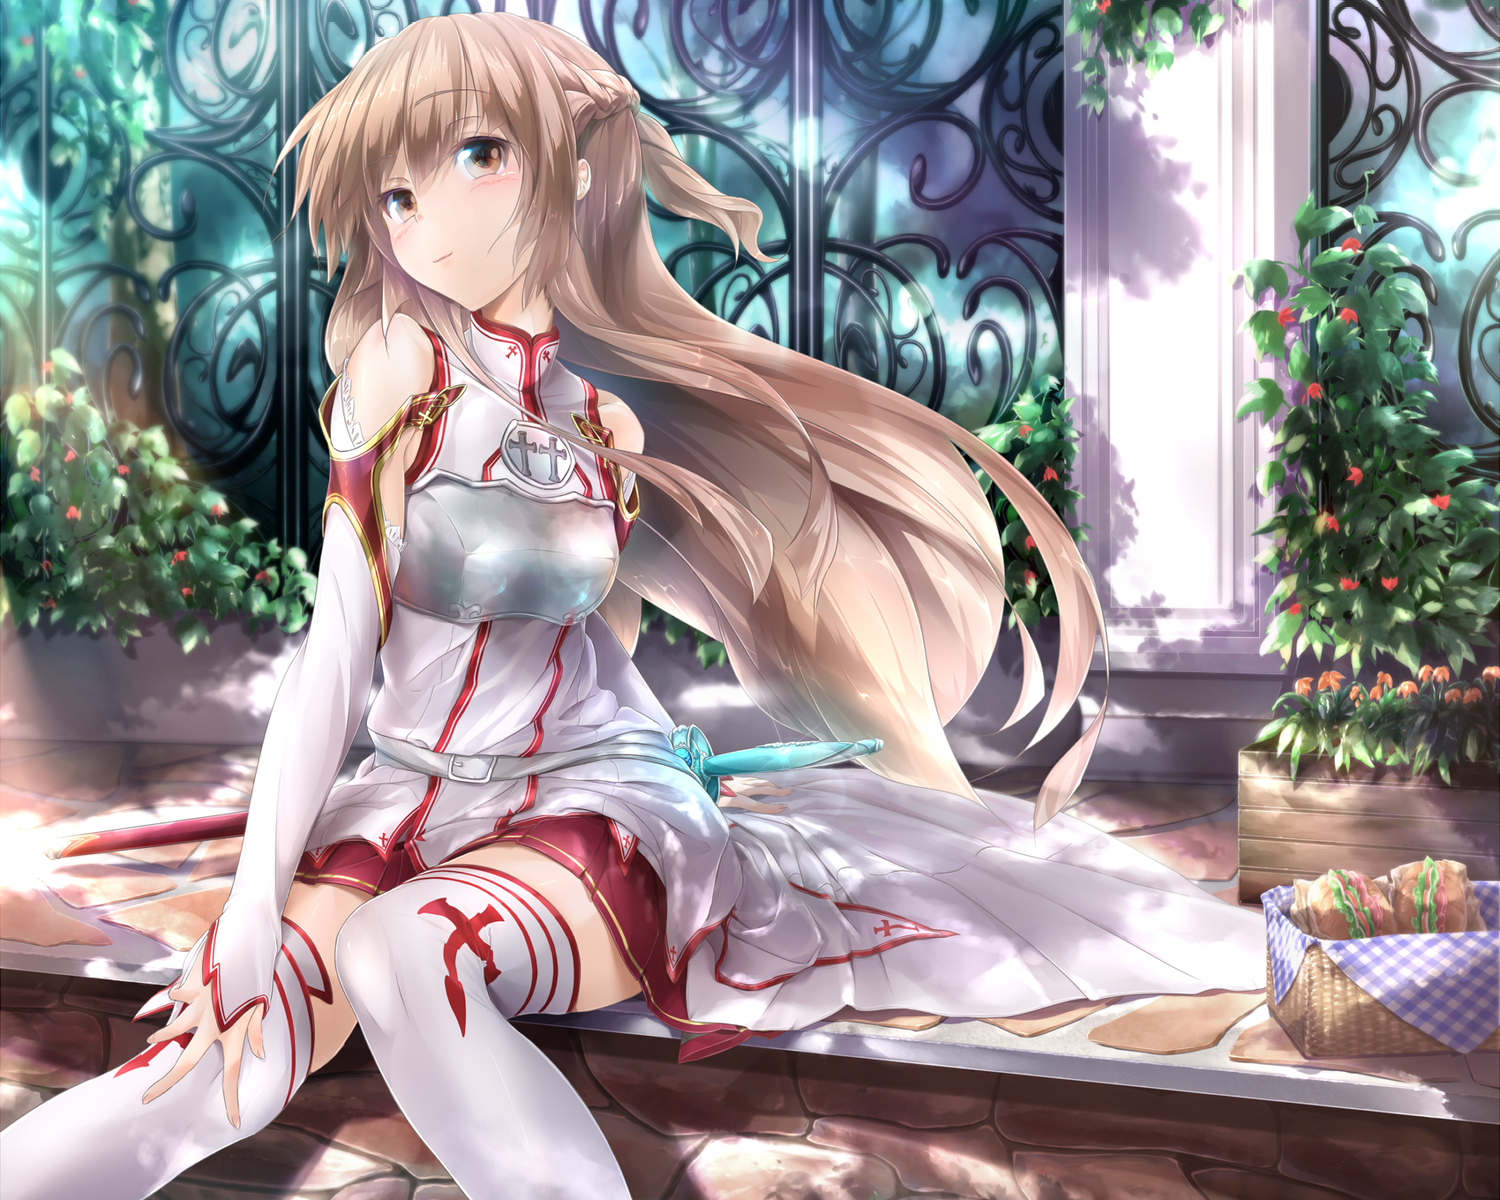 Asuna 16 Wallpapers Your daily Anime Wallpaper and Fan Art 1500x1200